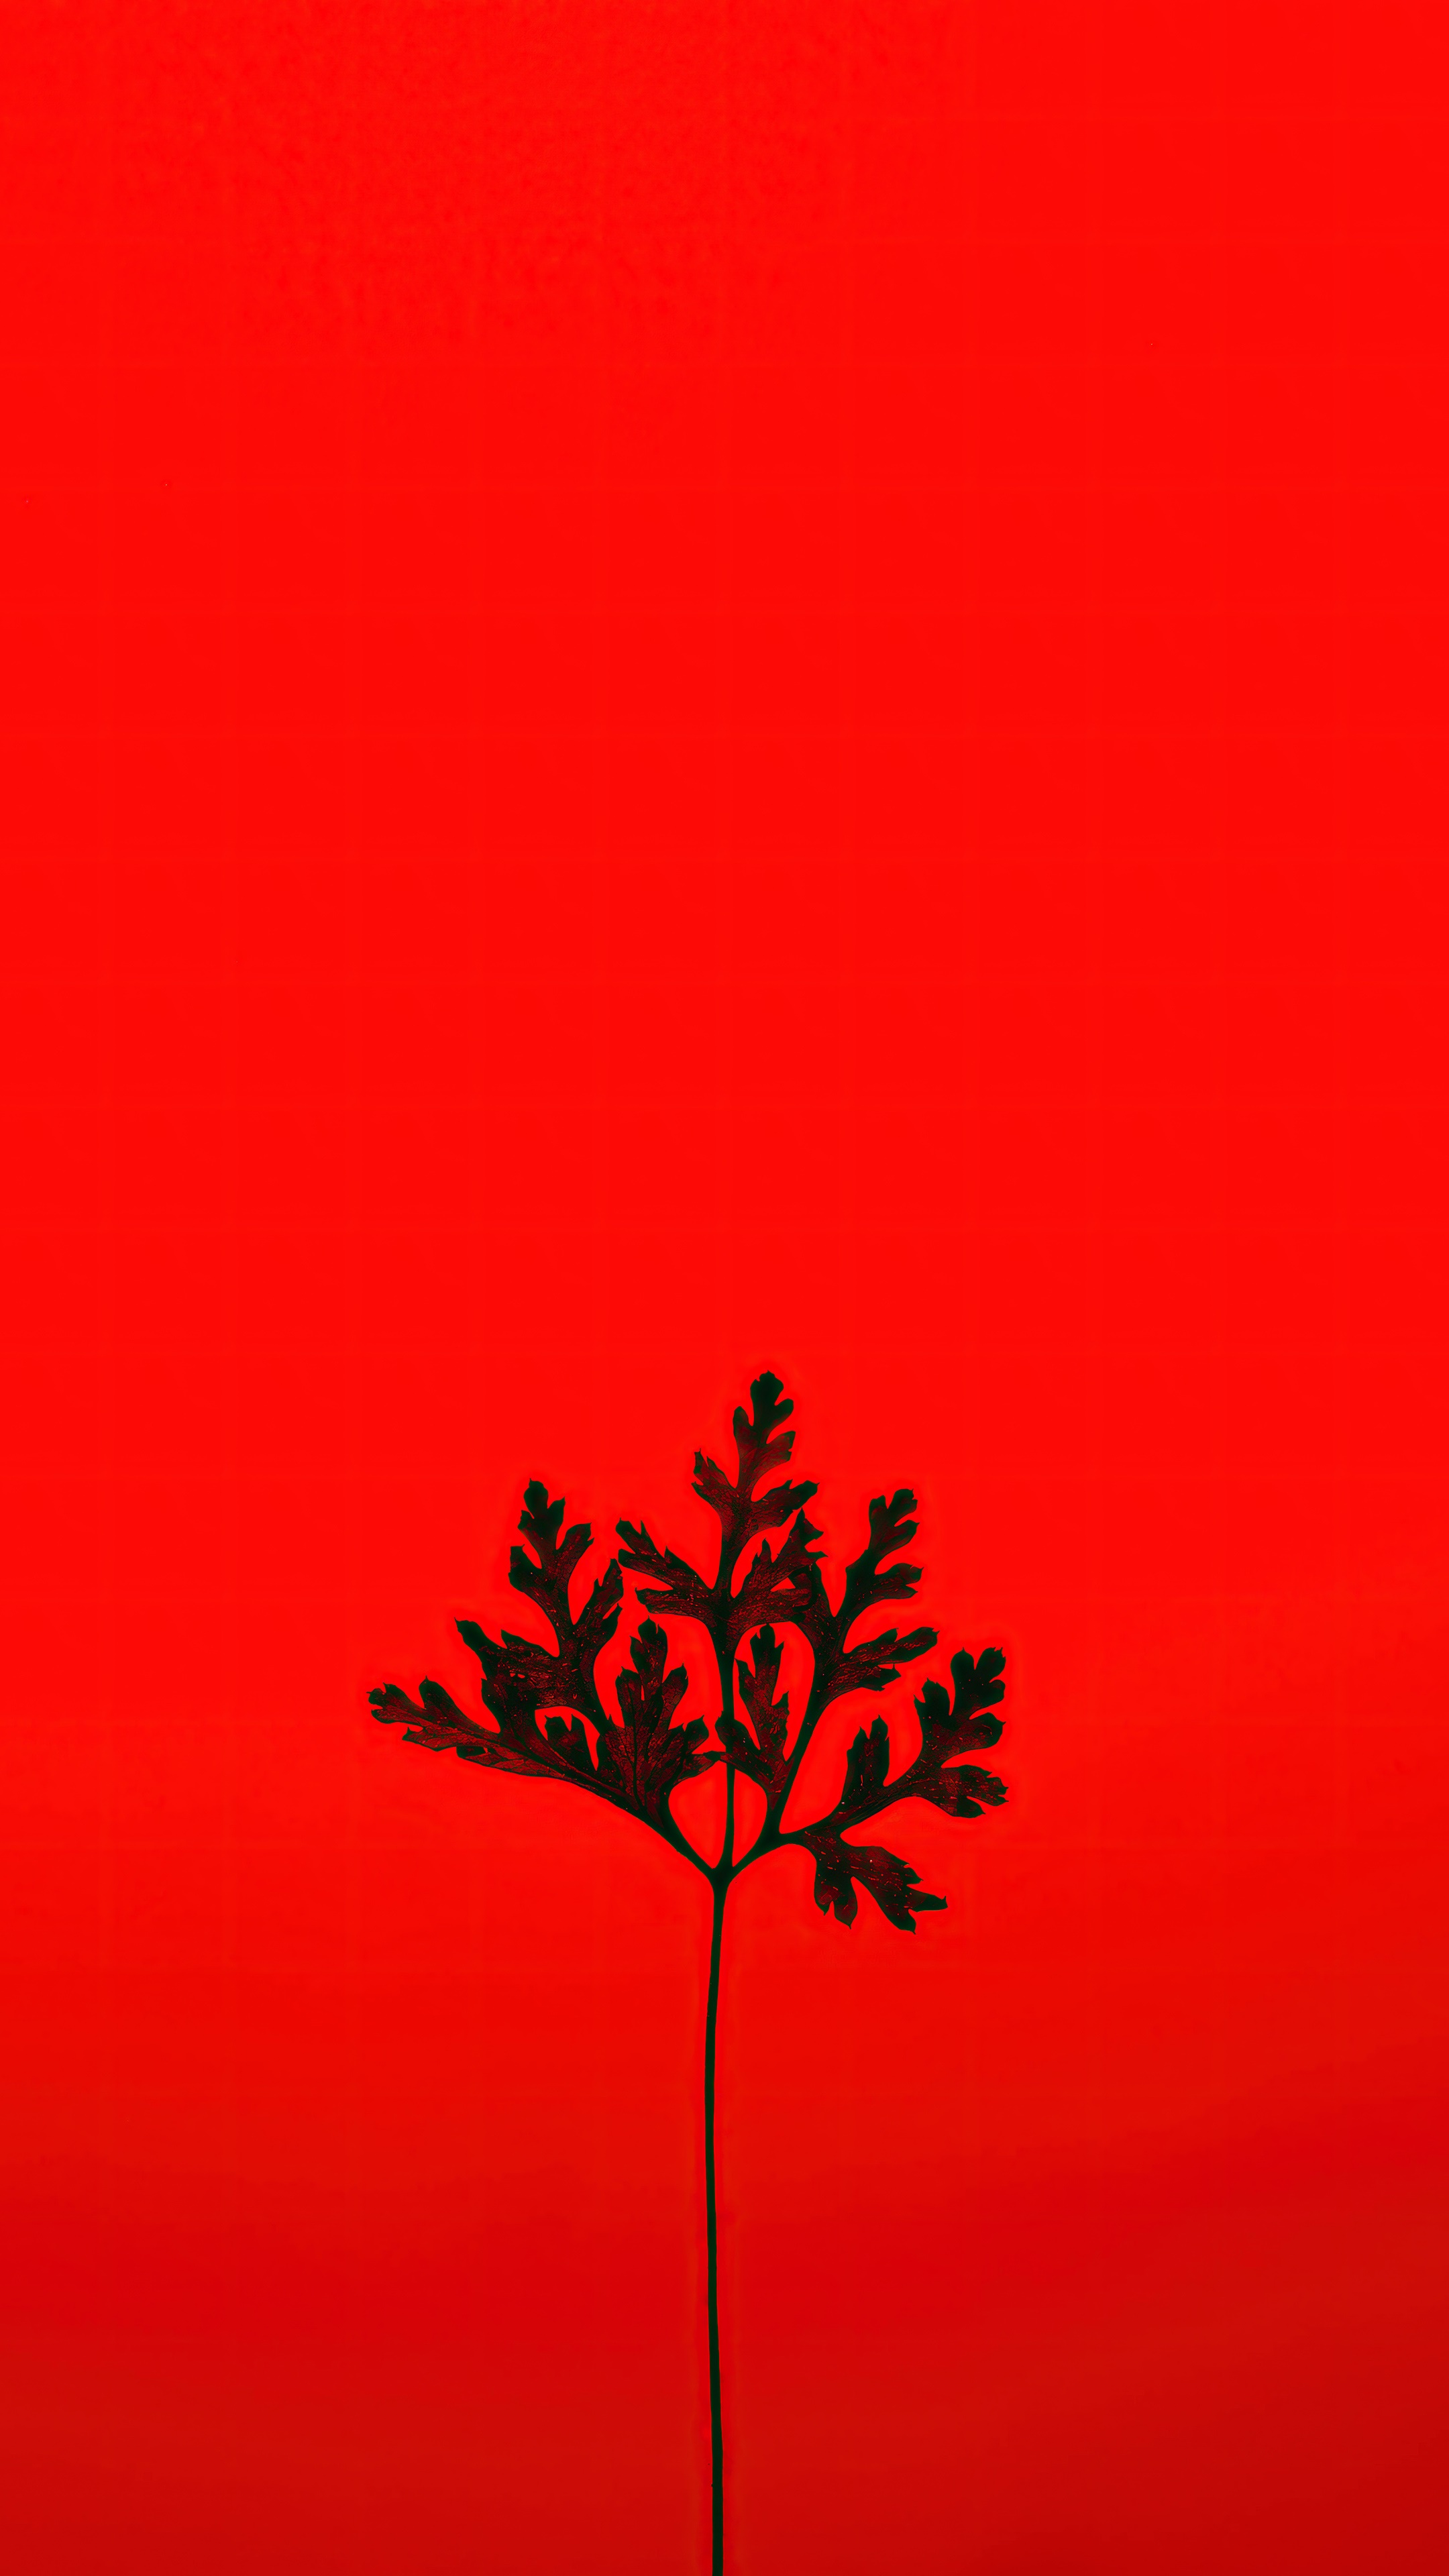 A single sprig of greenery against a bright red background - Red